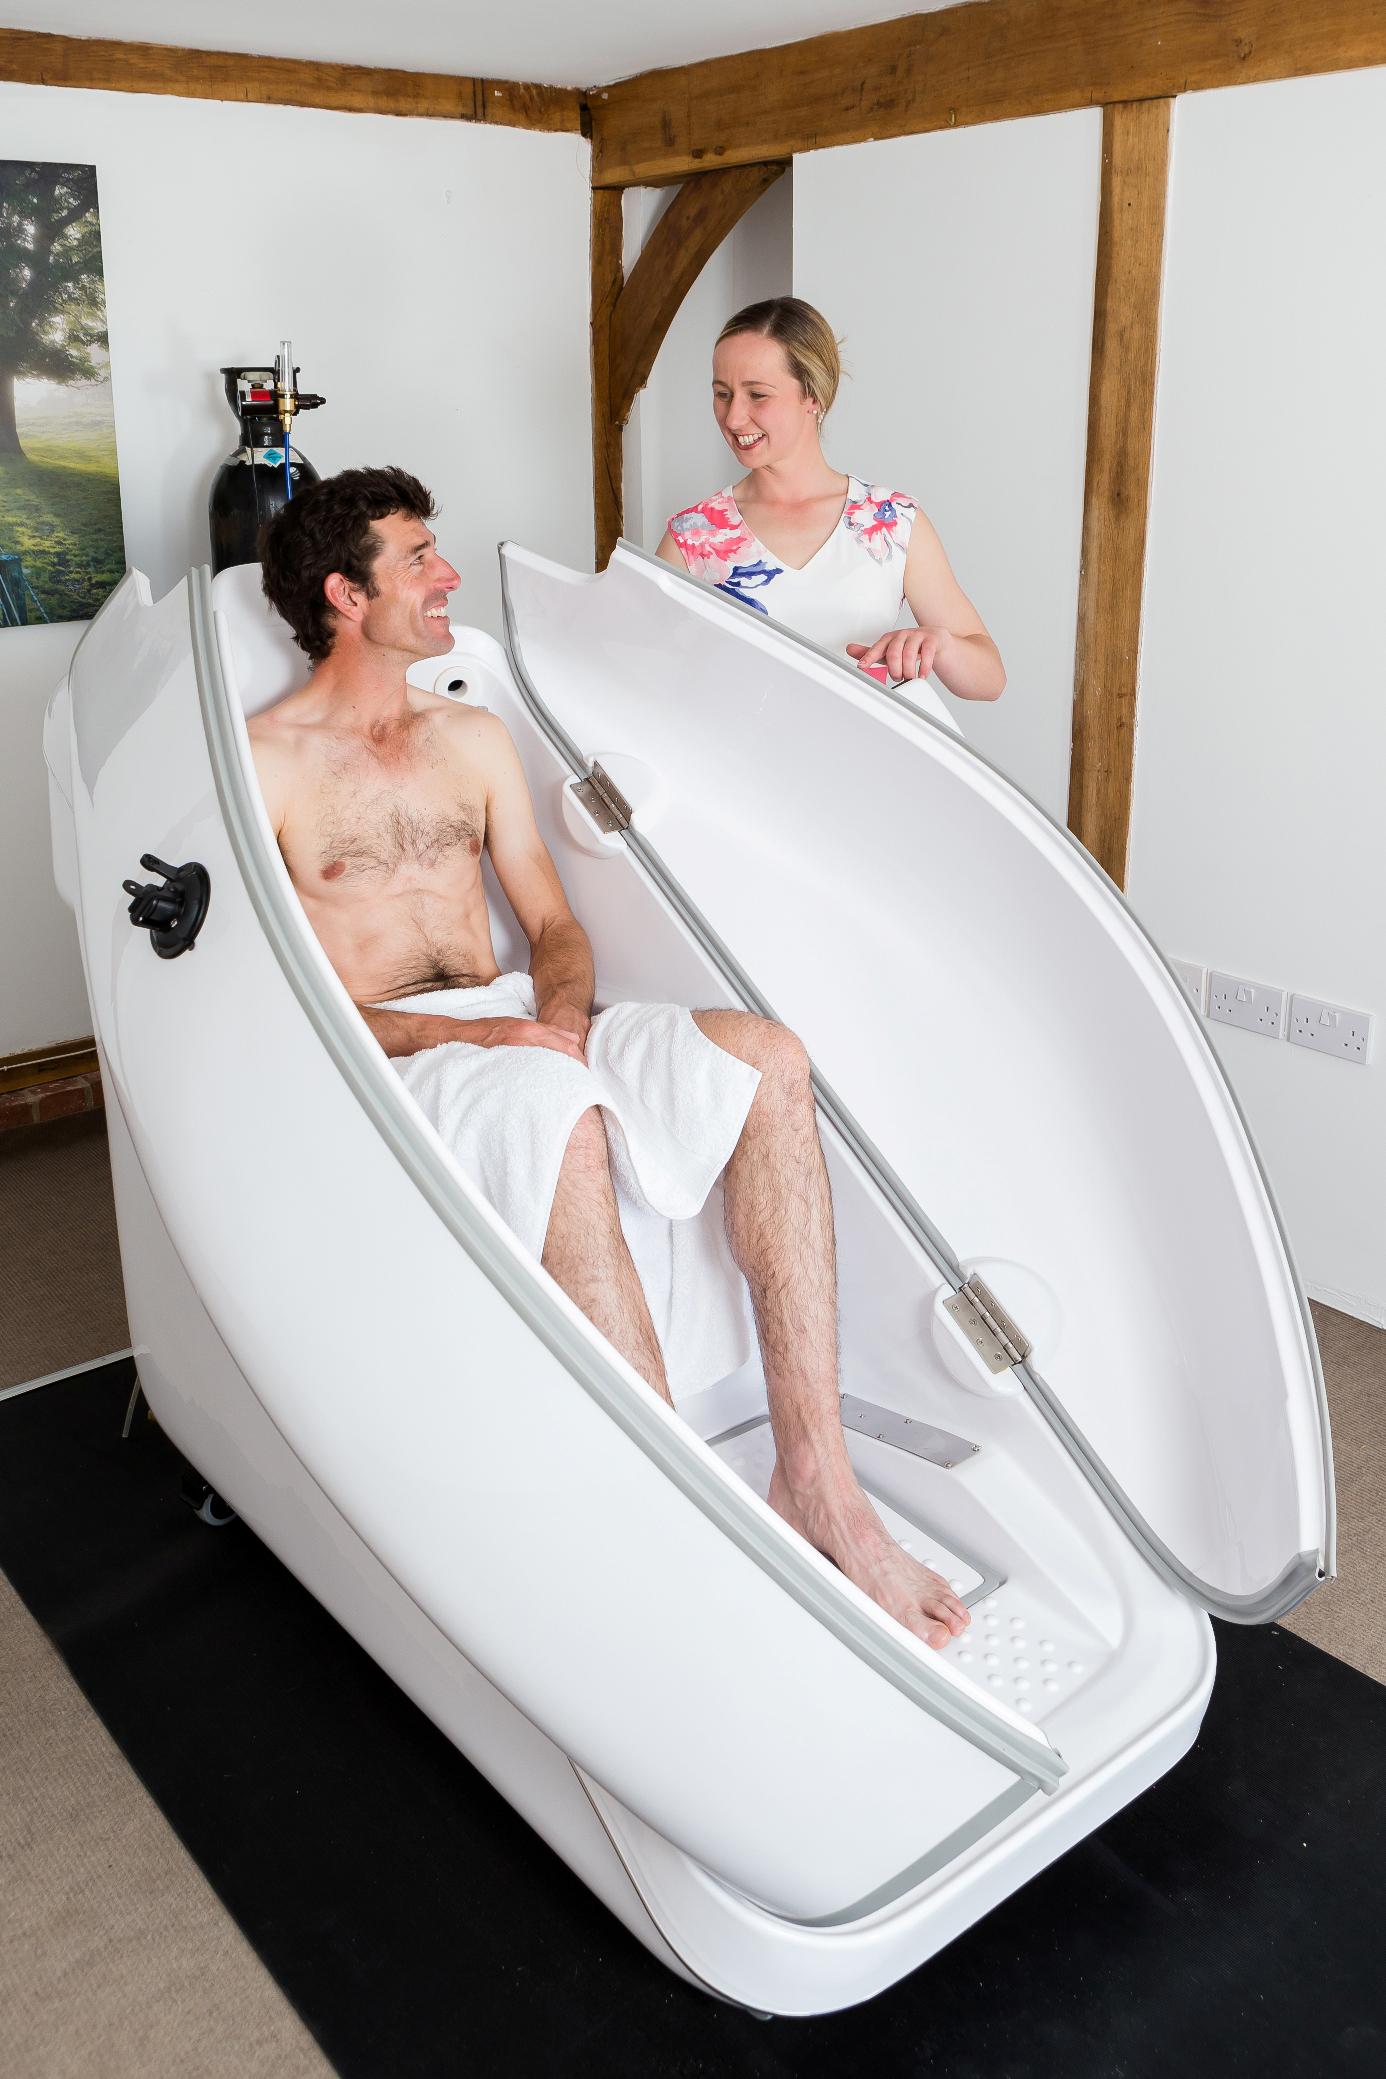 The steam saunas can be operated by any trained member of staff / 